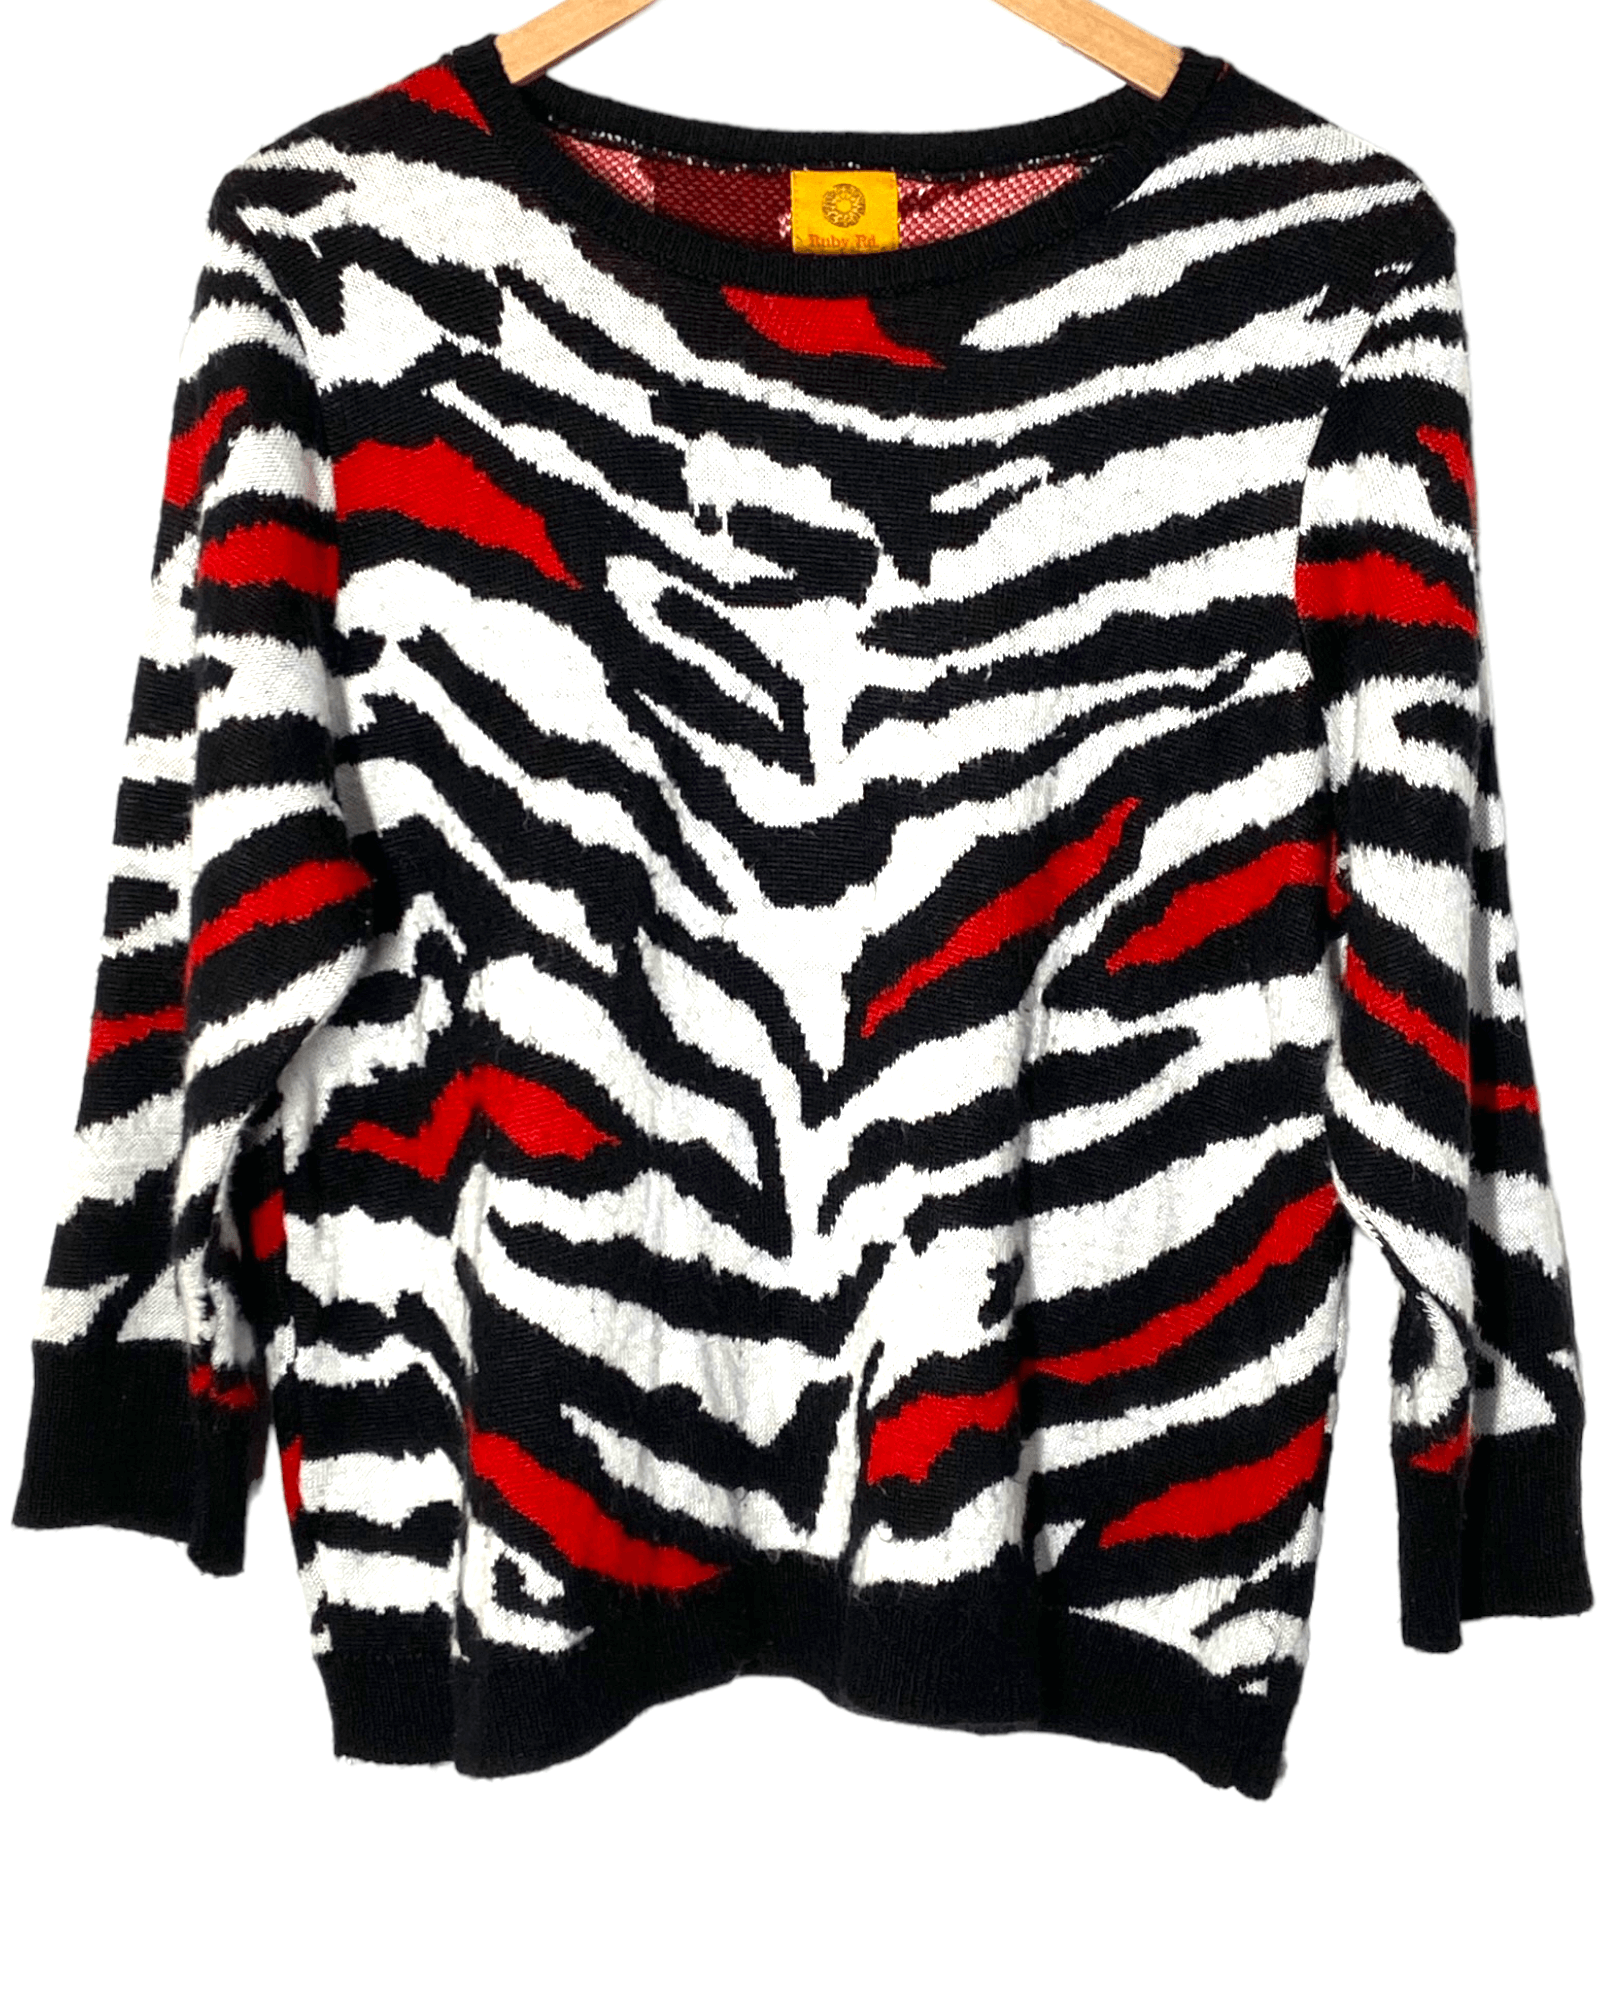 Bright Winter RUBY RD. animal print pullover sweater red black white